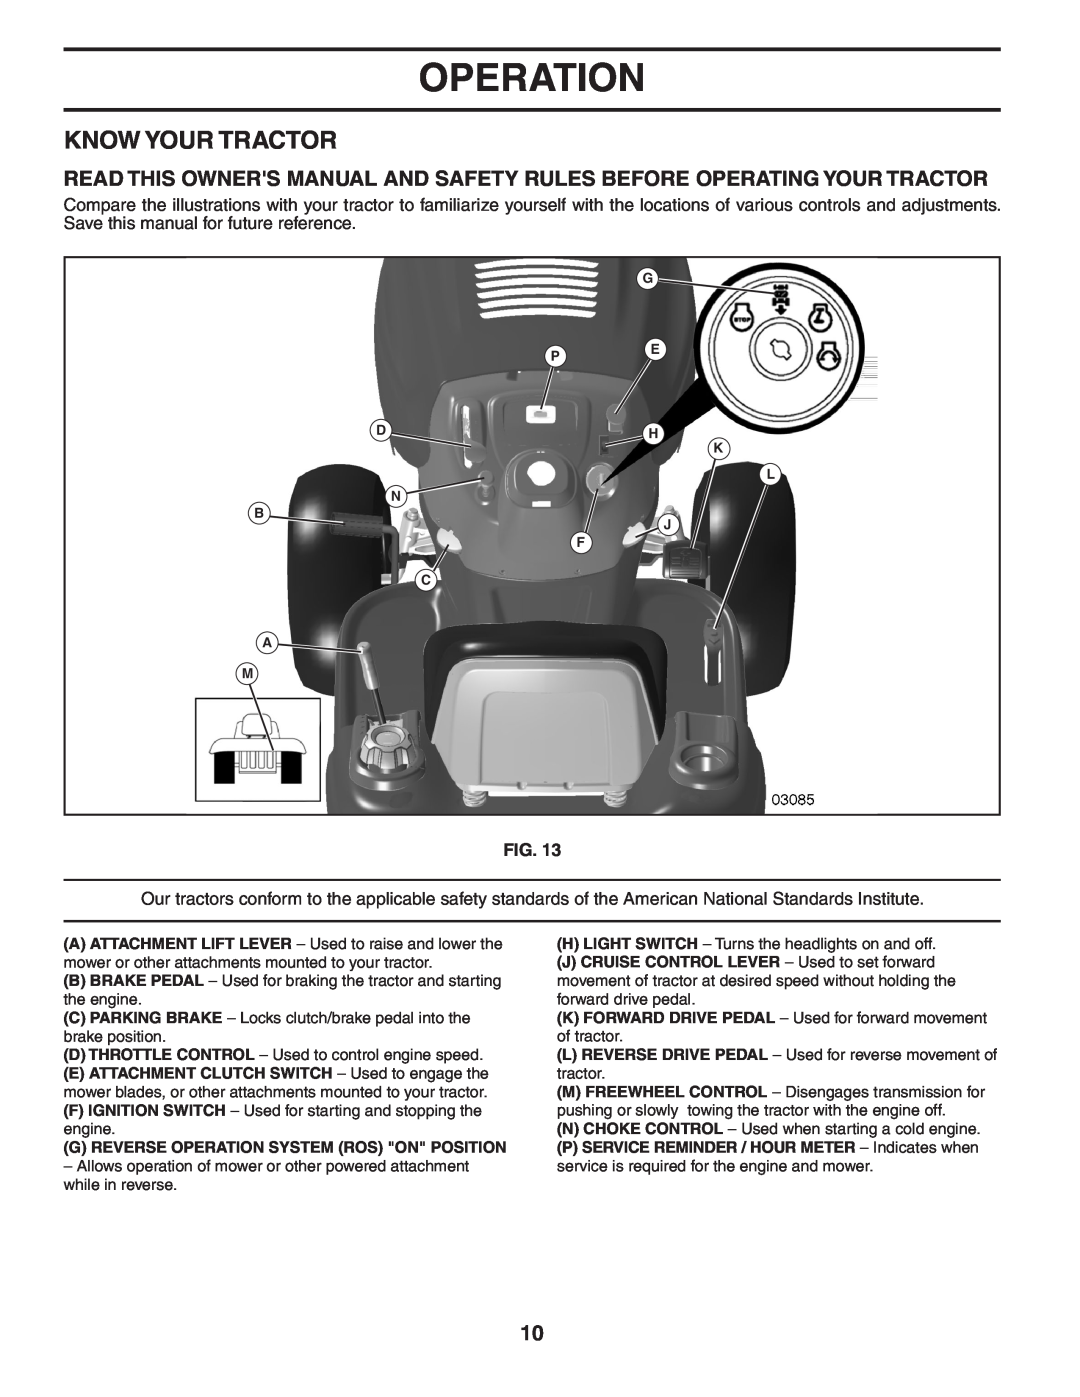 Poulan PB22H54YT manual Know Your Tractor, G Reverse Operation System Ros On Position 